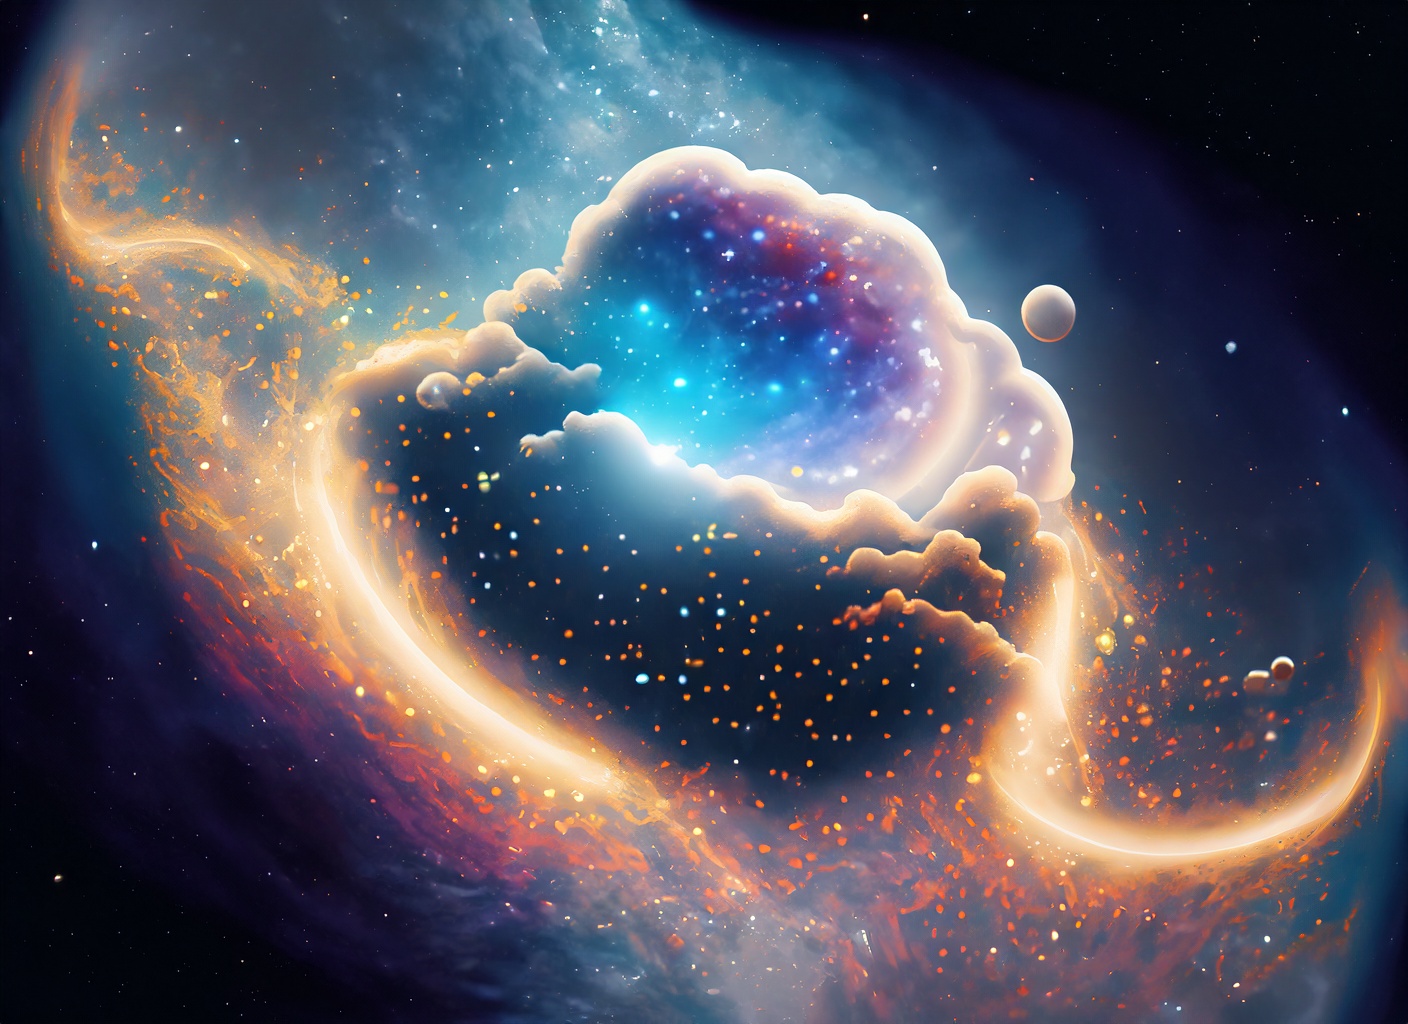 Cosmic Convergence of Data: SQL stars and NoSQL Nebulae Converge into a Galaxy